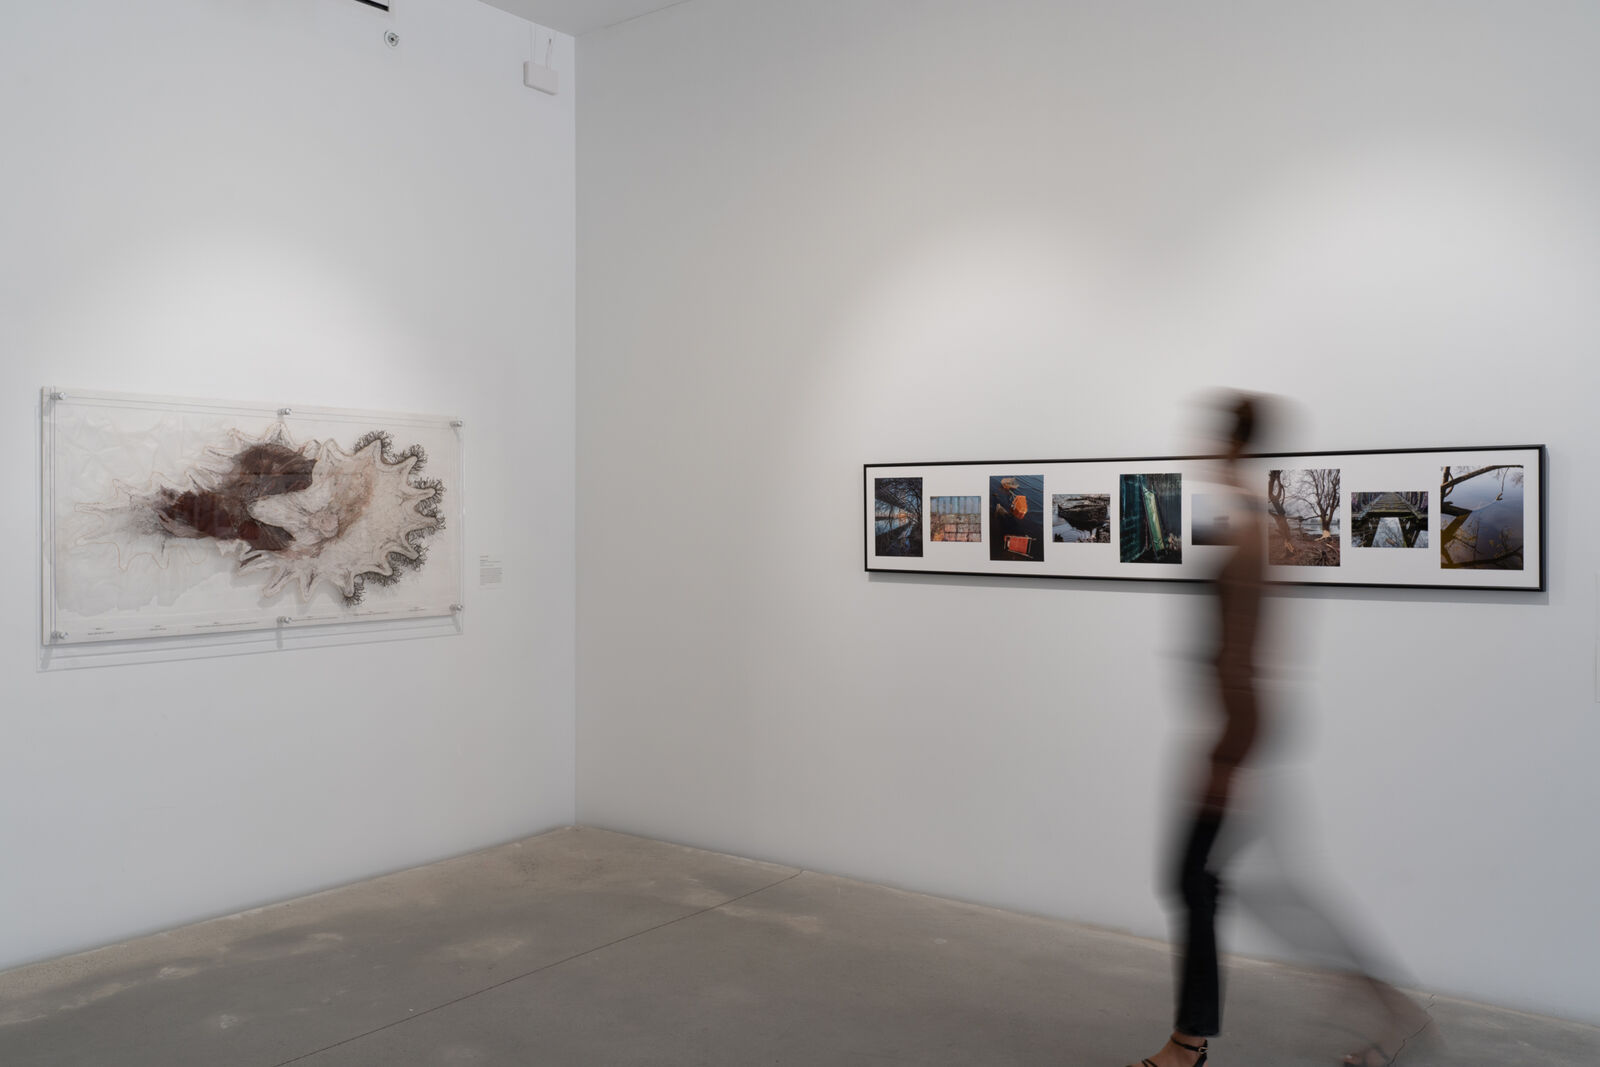 a person blurred walks in front of a collection of photography and fiber arts piece in a gallery